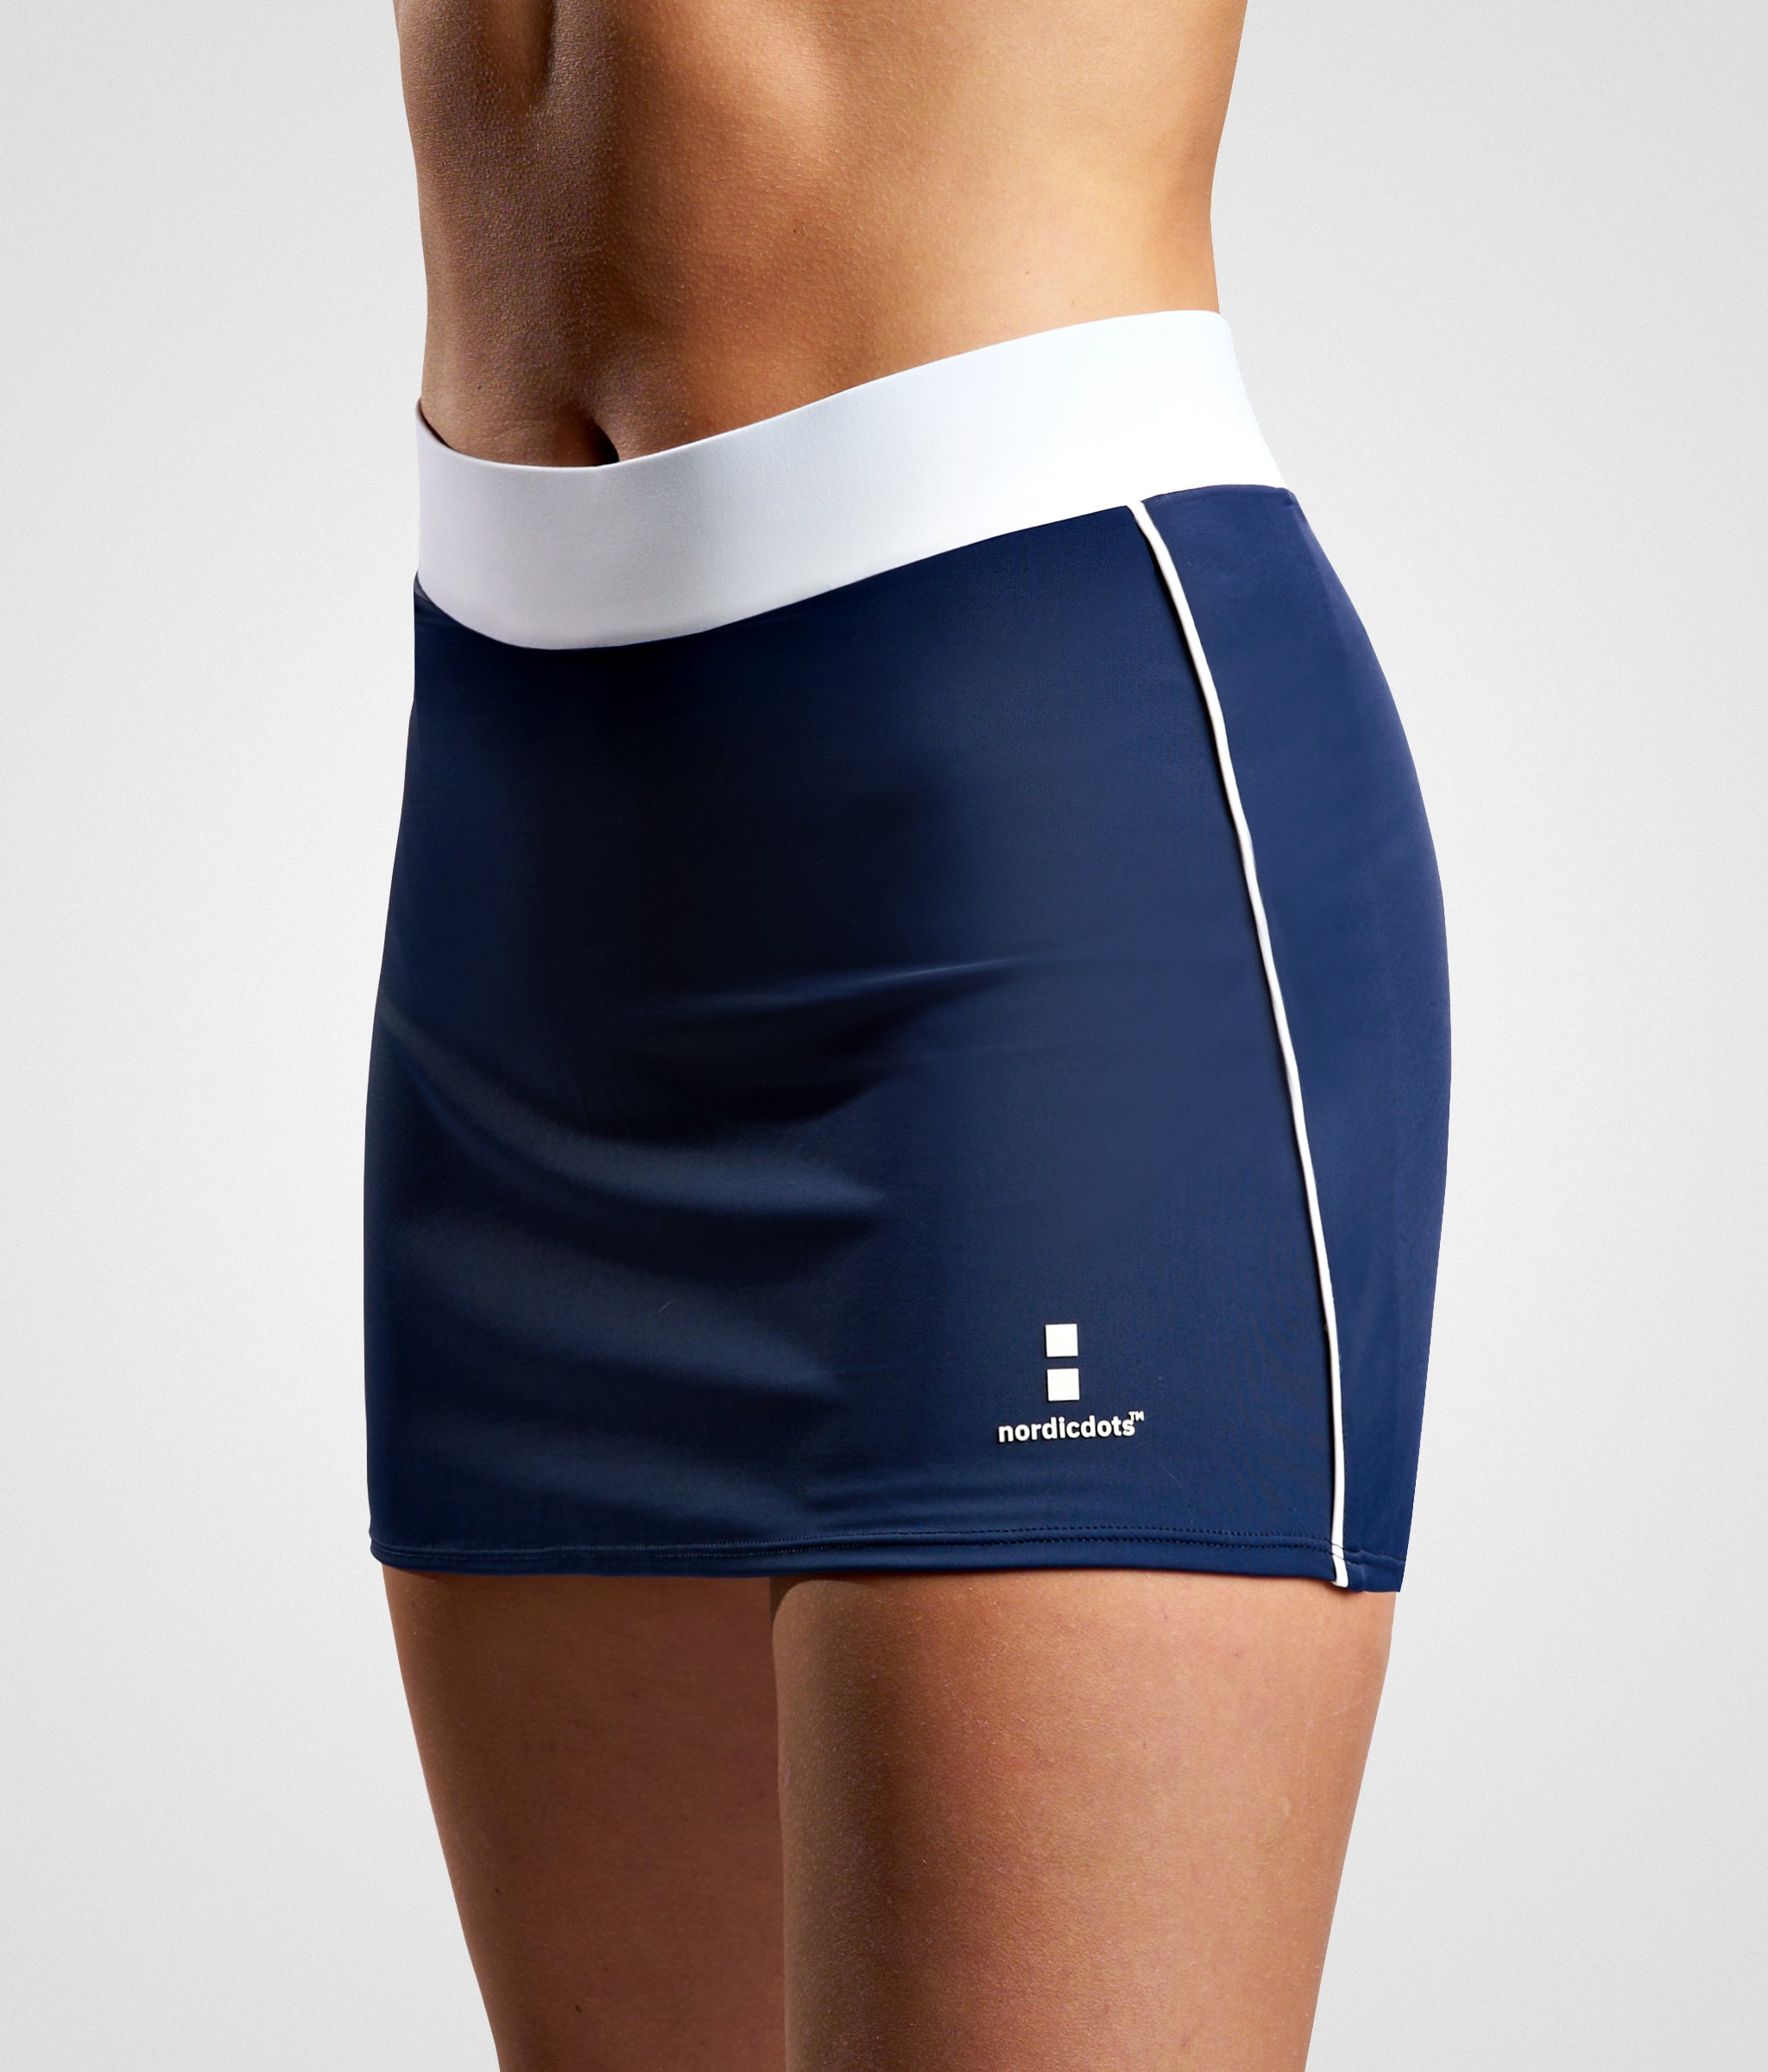 nordicdots performance skirt for padel, tennis or golf with flat elastic waistband and built-in compression shorts.